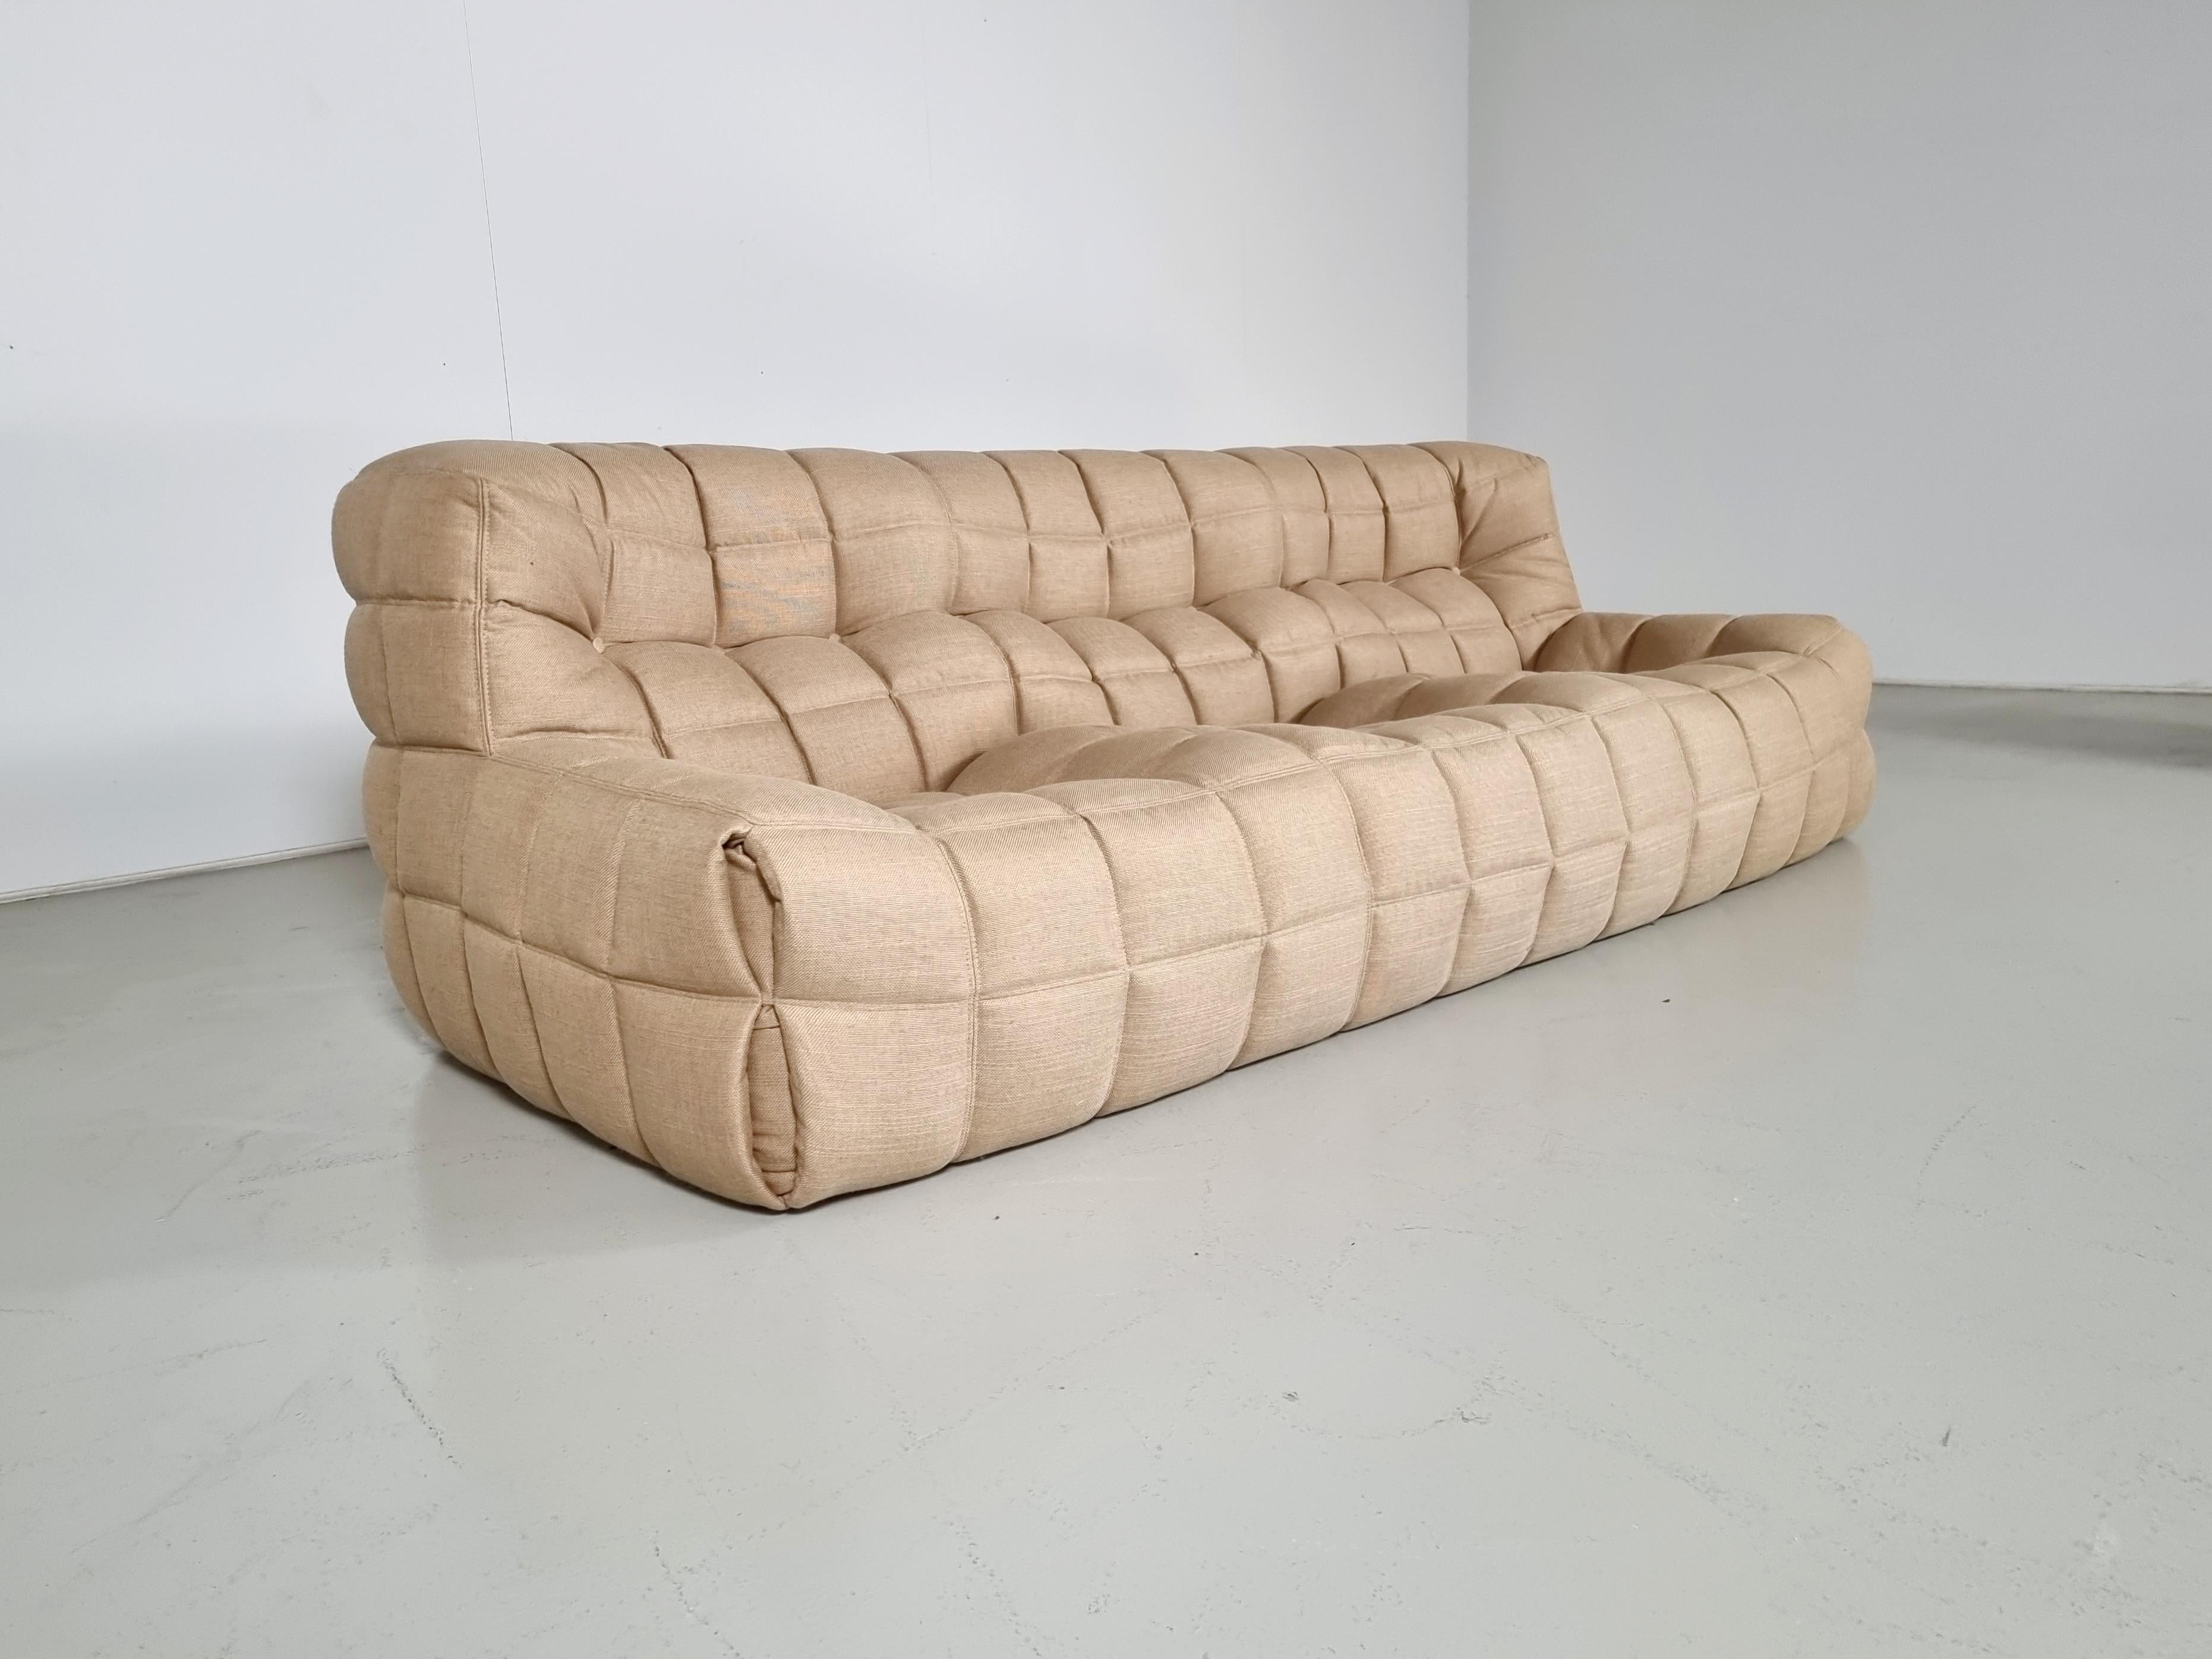 Kashima 3-seater sofa, Michel Ducaroy, Ligne Roset, 1970s

This sofa is an early production signed with Ligne Roset labels on the back and Ligne Roset logo fabric on the undersides

Designed to mimic floating clouds, the square stitched and